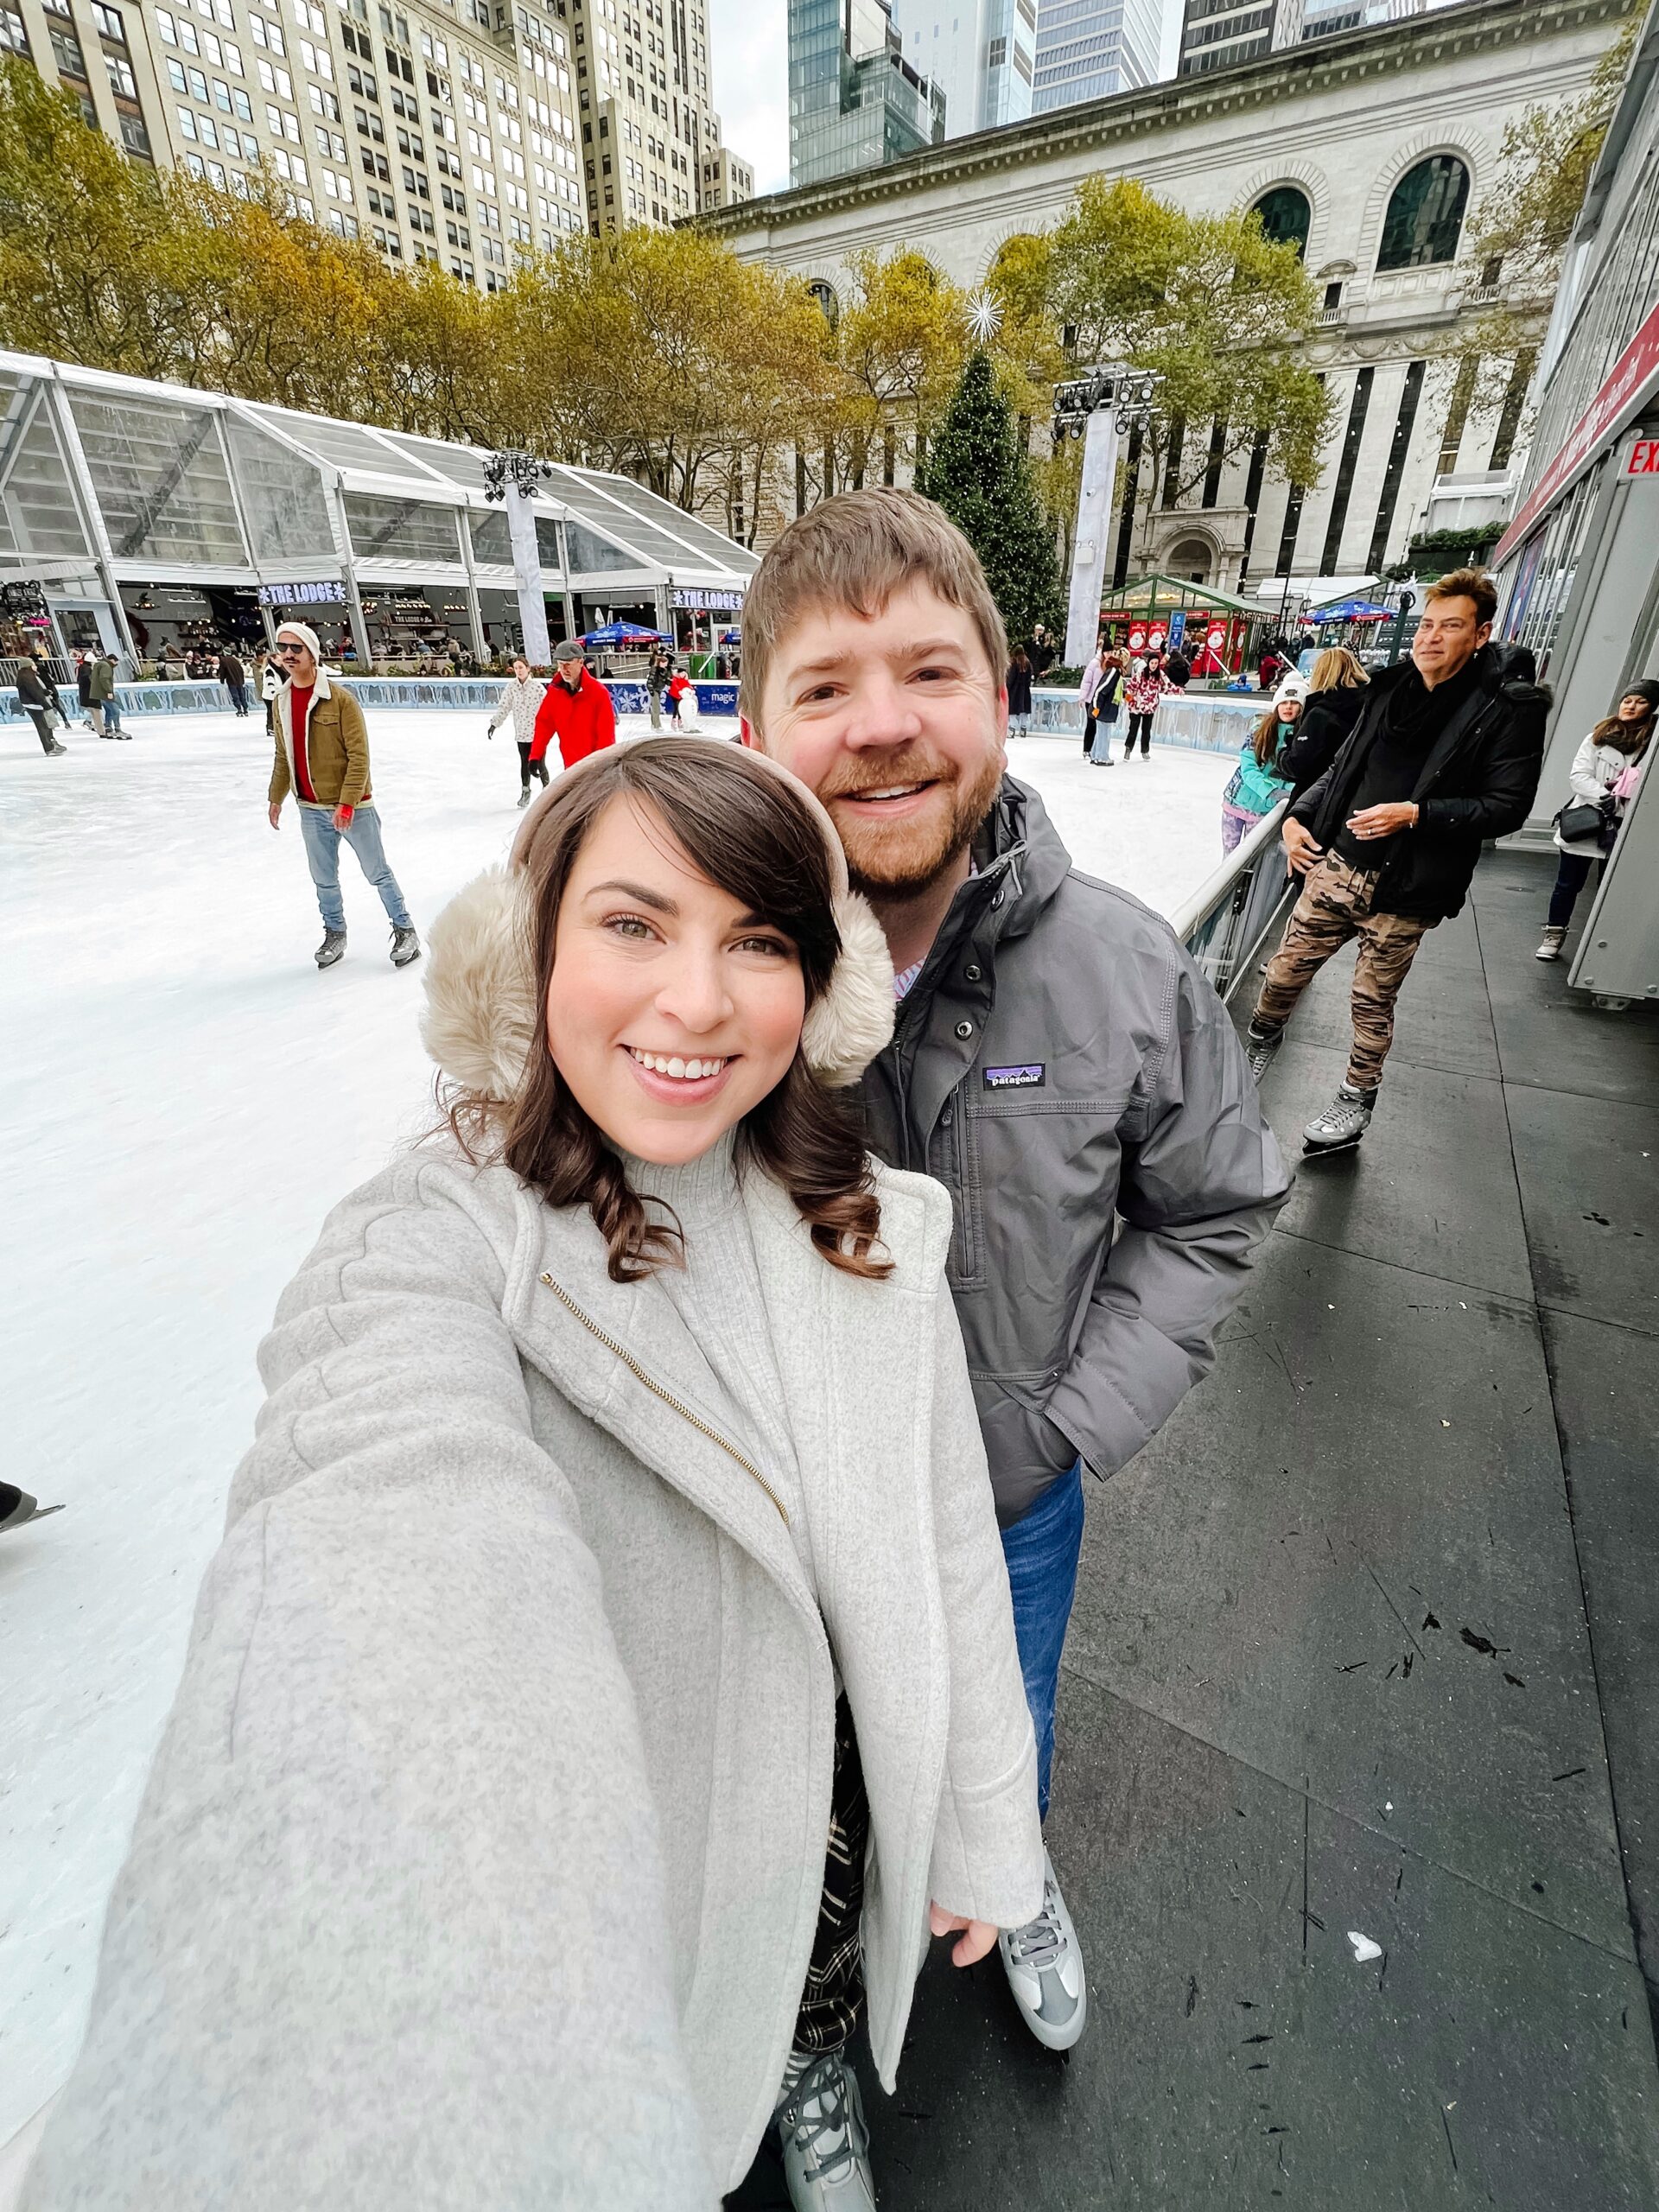 Brittney Naylor and husband at Bryant Park ice skating rink in New York City.